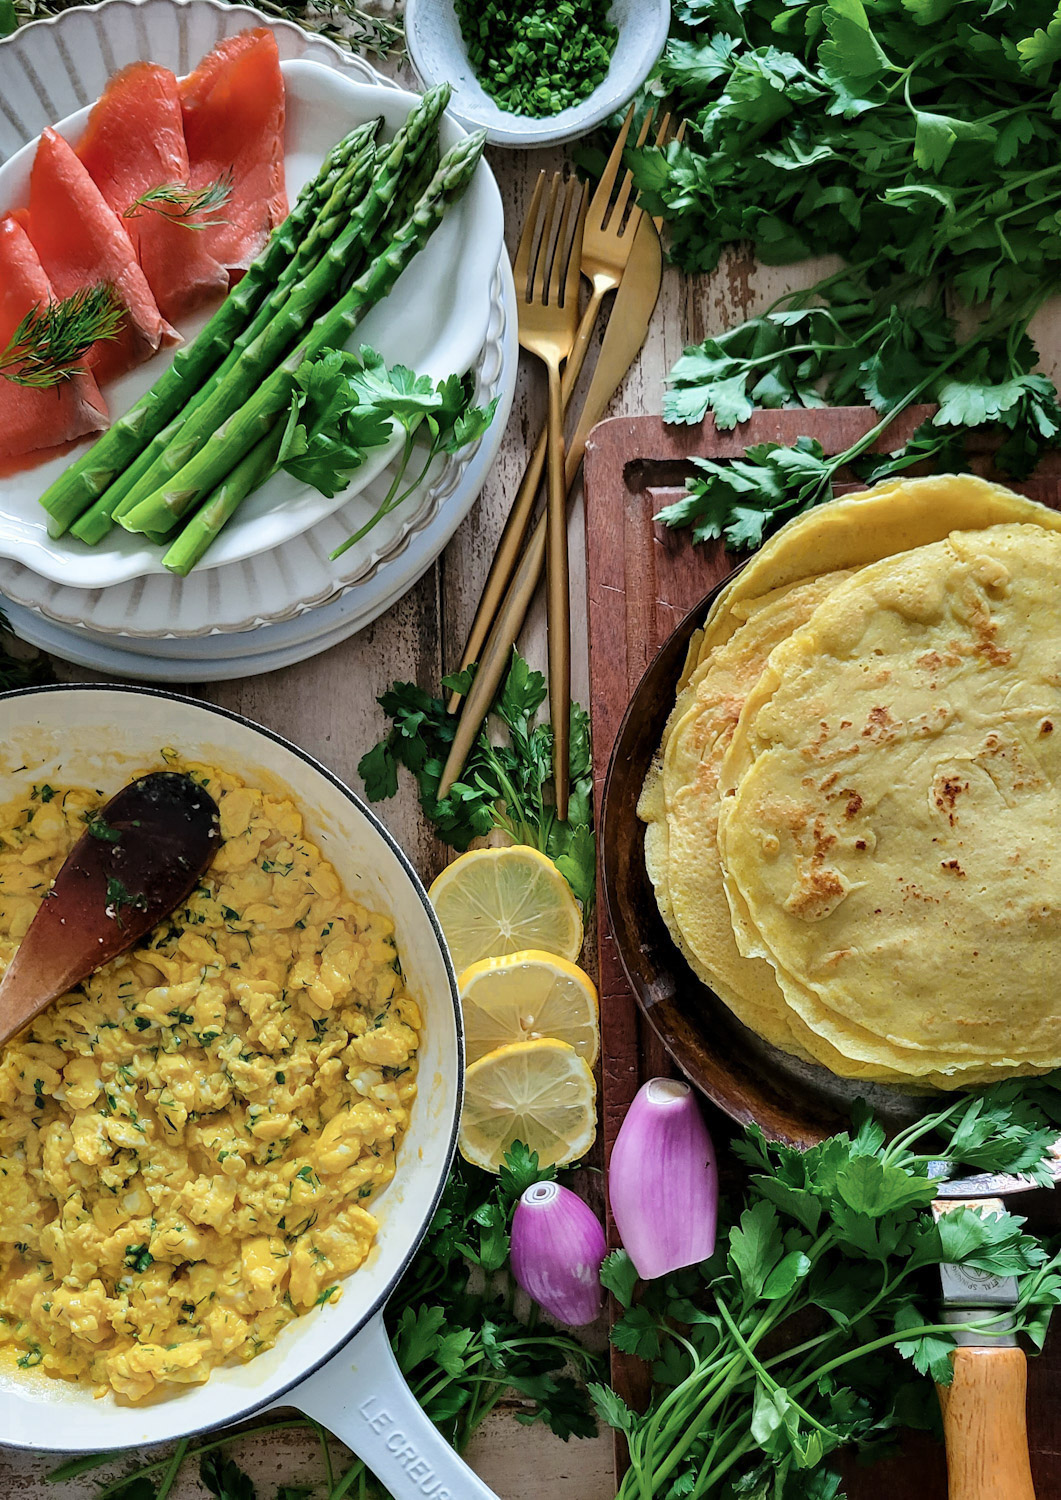 Herb scrambled eggs in a skillet, stack of savory crepes in a crepe pan, smoked salmon and steamed asparagus